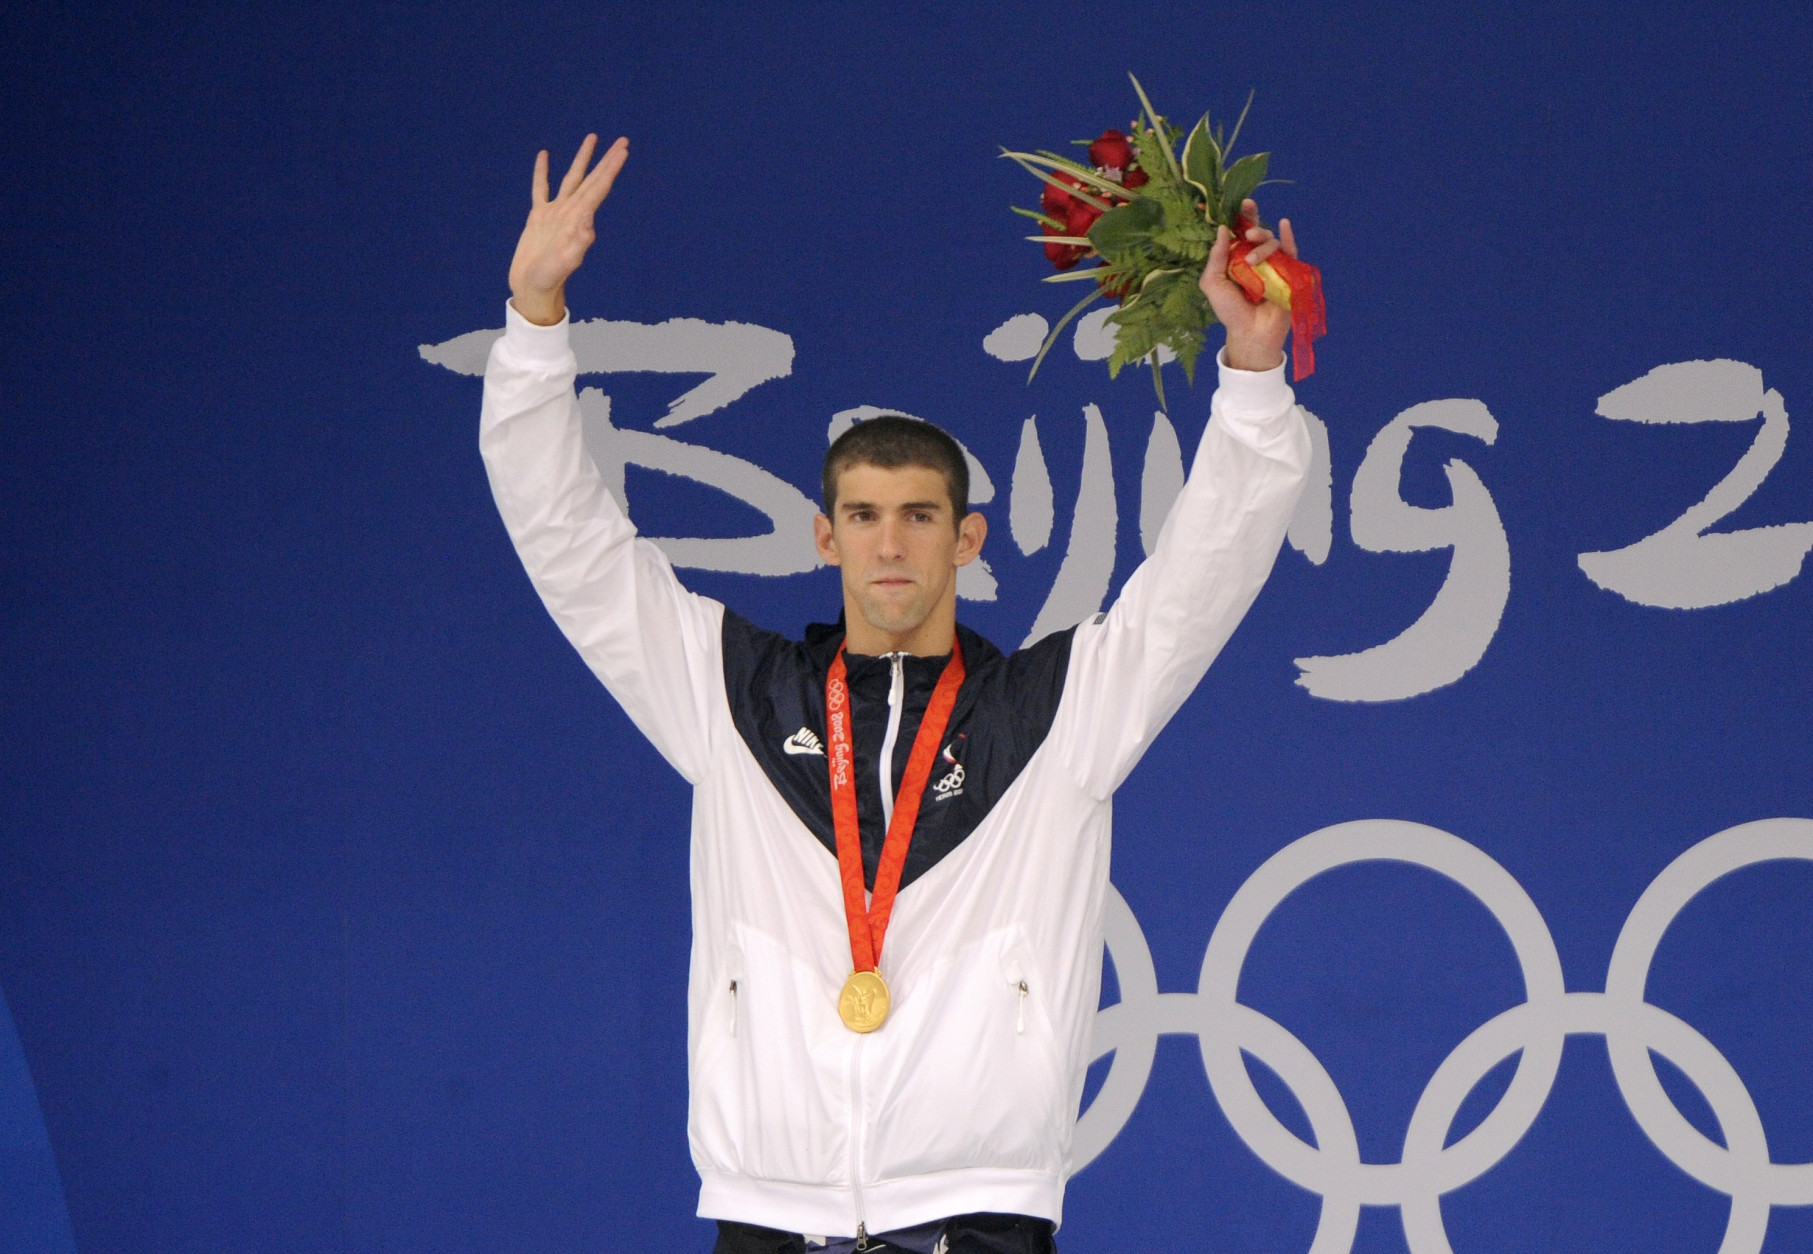 U.S. Swimmer Michael Phelps during gold medal ceremony for the men's 200-meter butterfly final during the swimming competitions in the National Aquatics Center at the Beijing 2008 Olympics in Beijing, Wednesday, Aug. 13, 2008. Phelps set a world record in the event. (AP Photo/Mark J. Terrill)